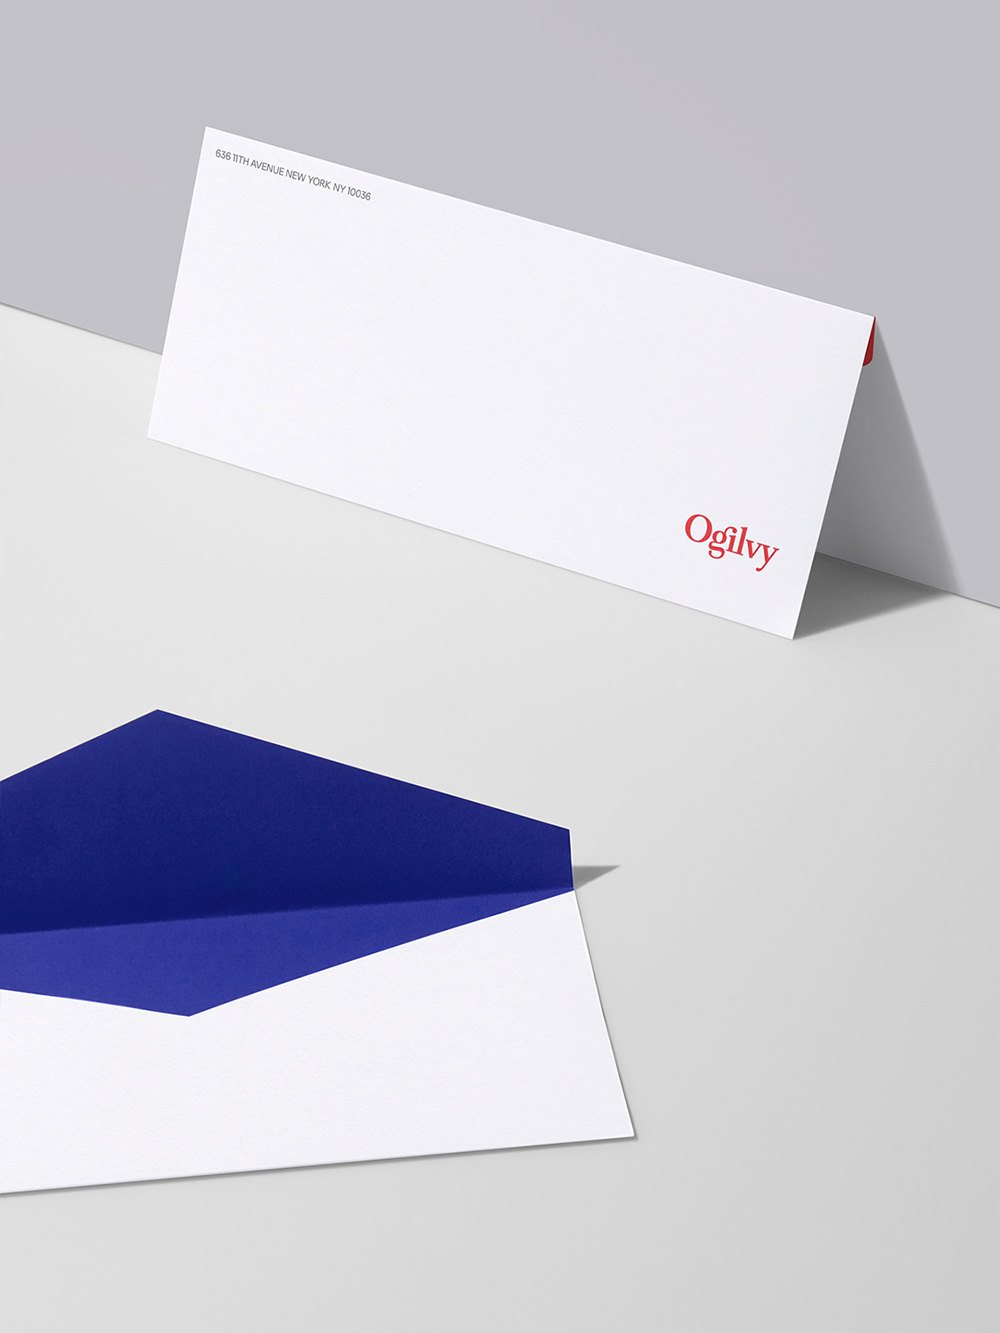 New Logo and Identity for Ogilvy by COLLINS